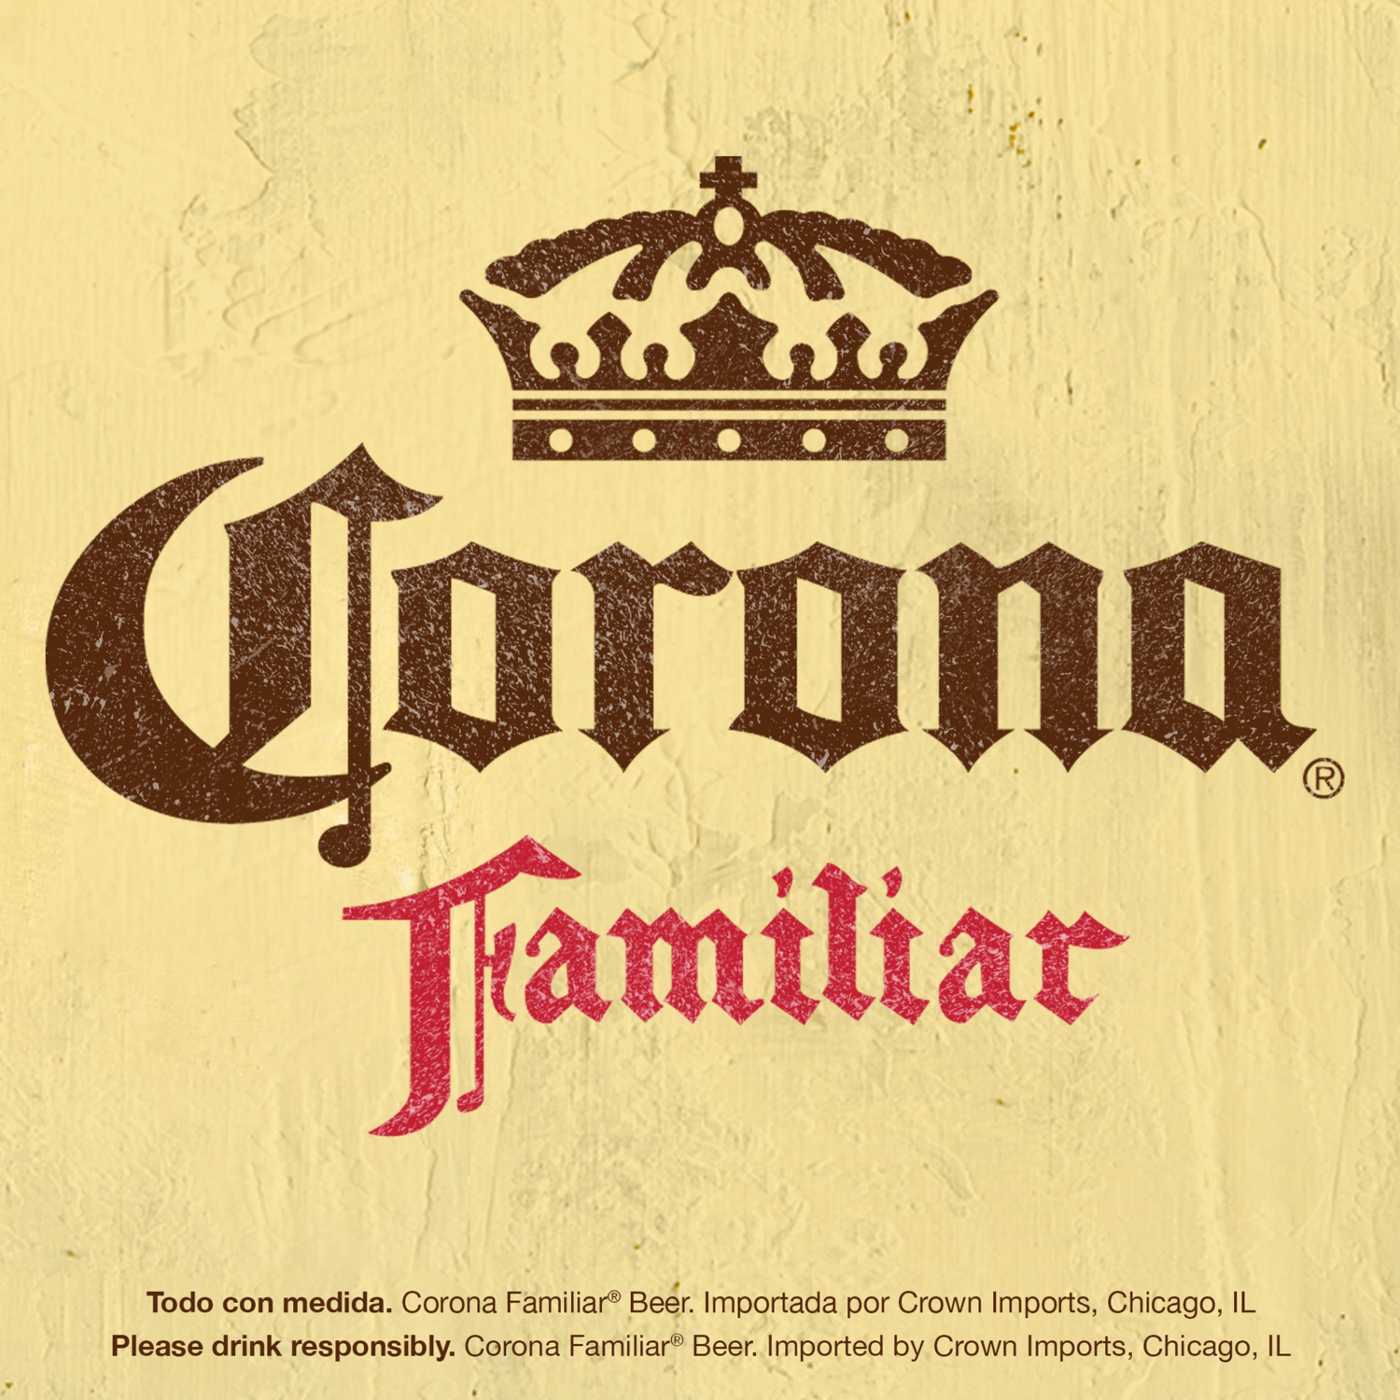 Corona Familiar Mexican Lager Import Beer 12 oz Bottles, 6 pk; image 8 of 10